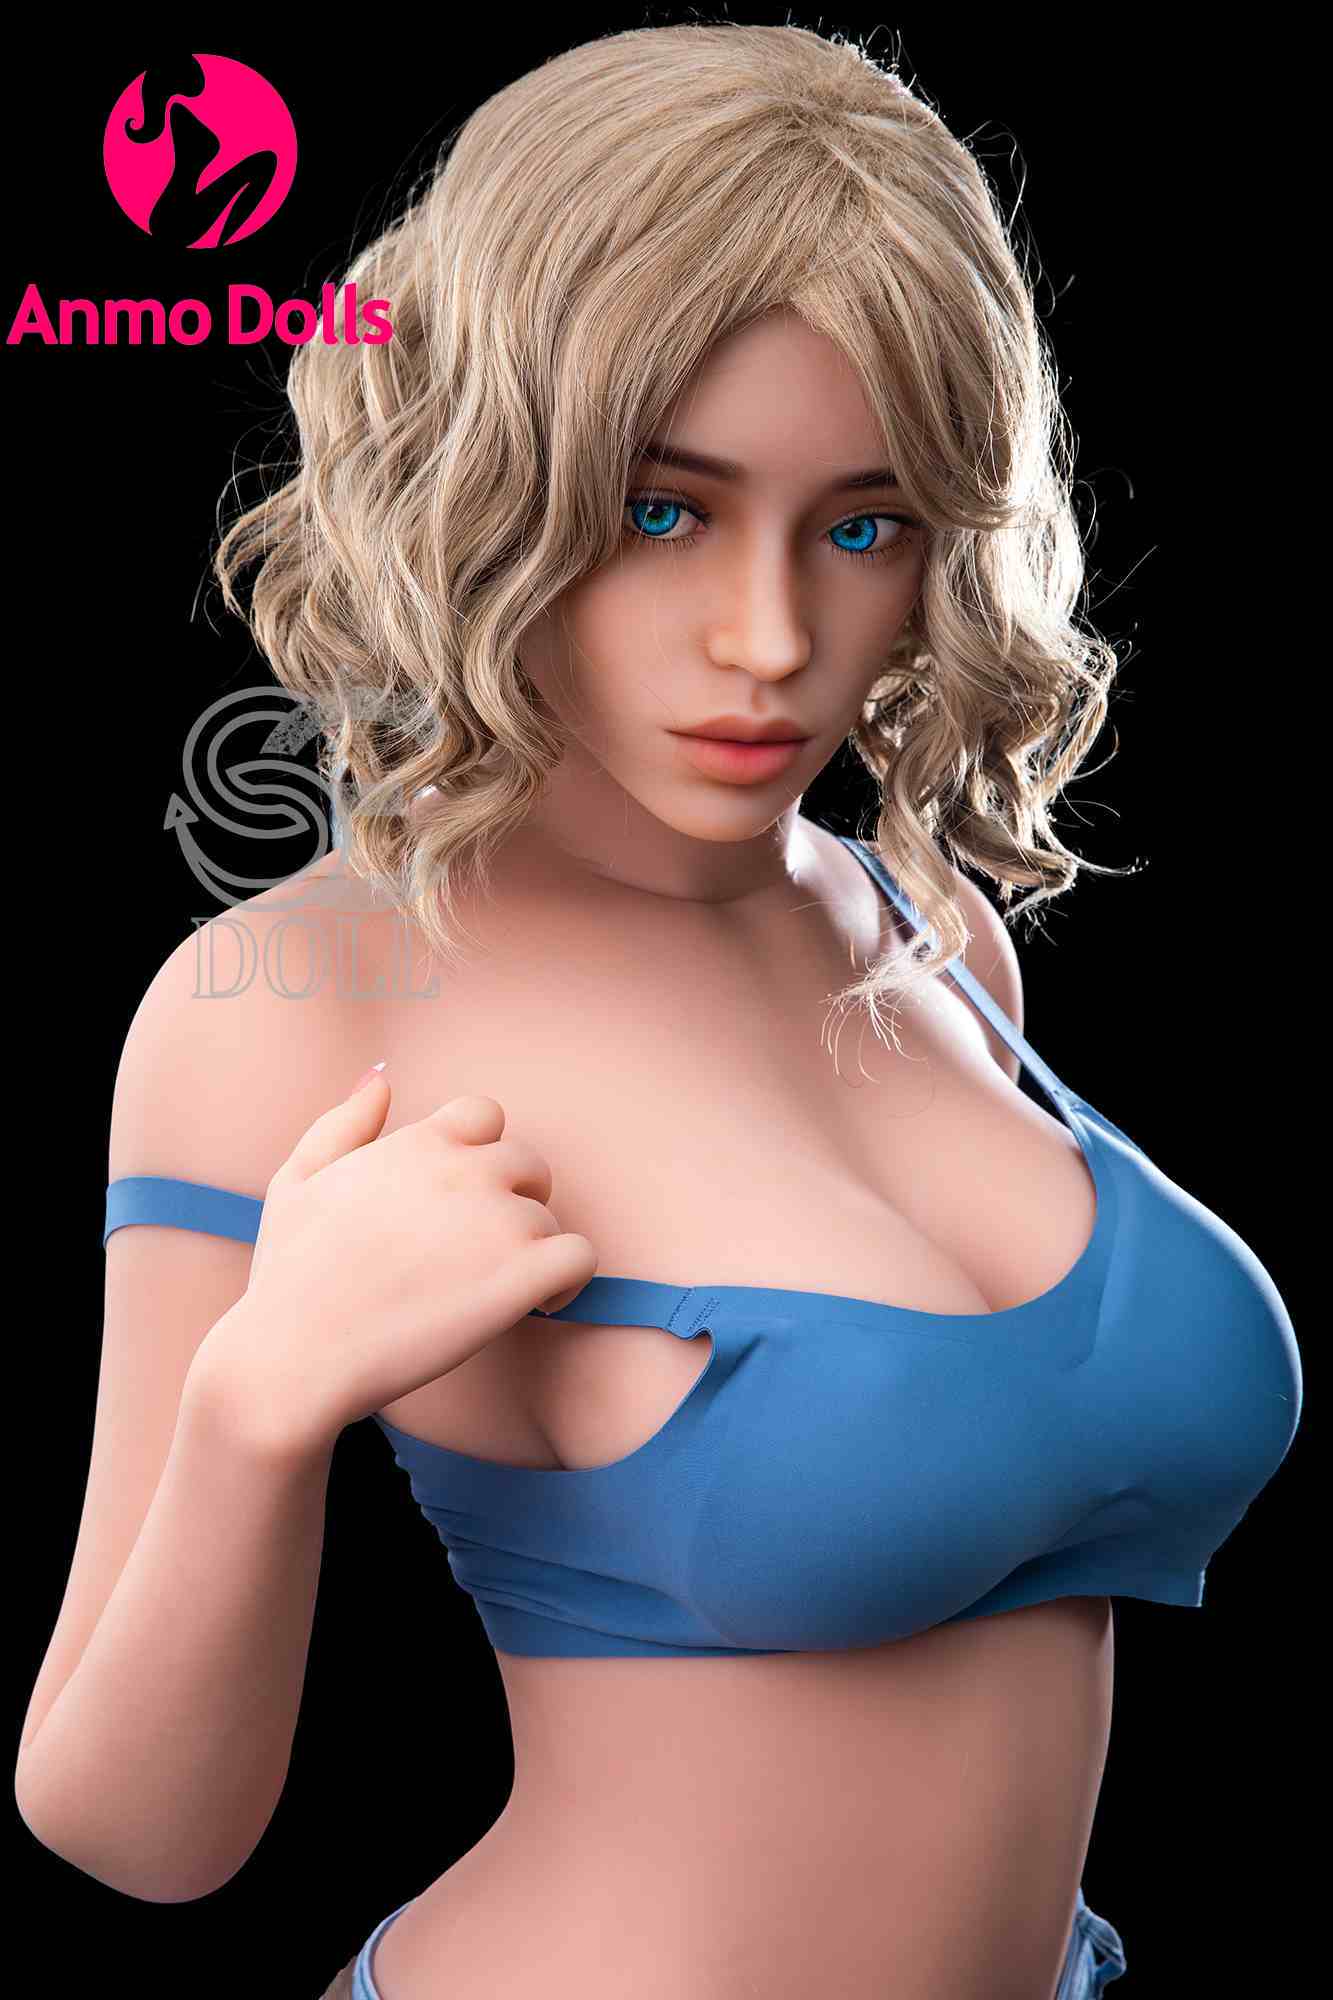 Unmatched Pleasure with Kelsie: The 161cm Blonde TPE Sex Doll